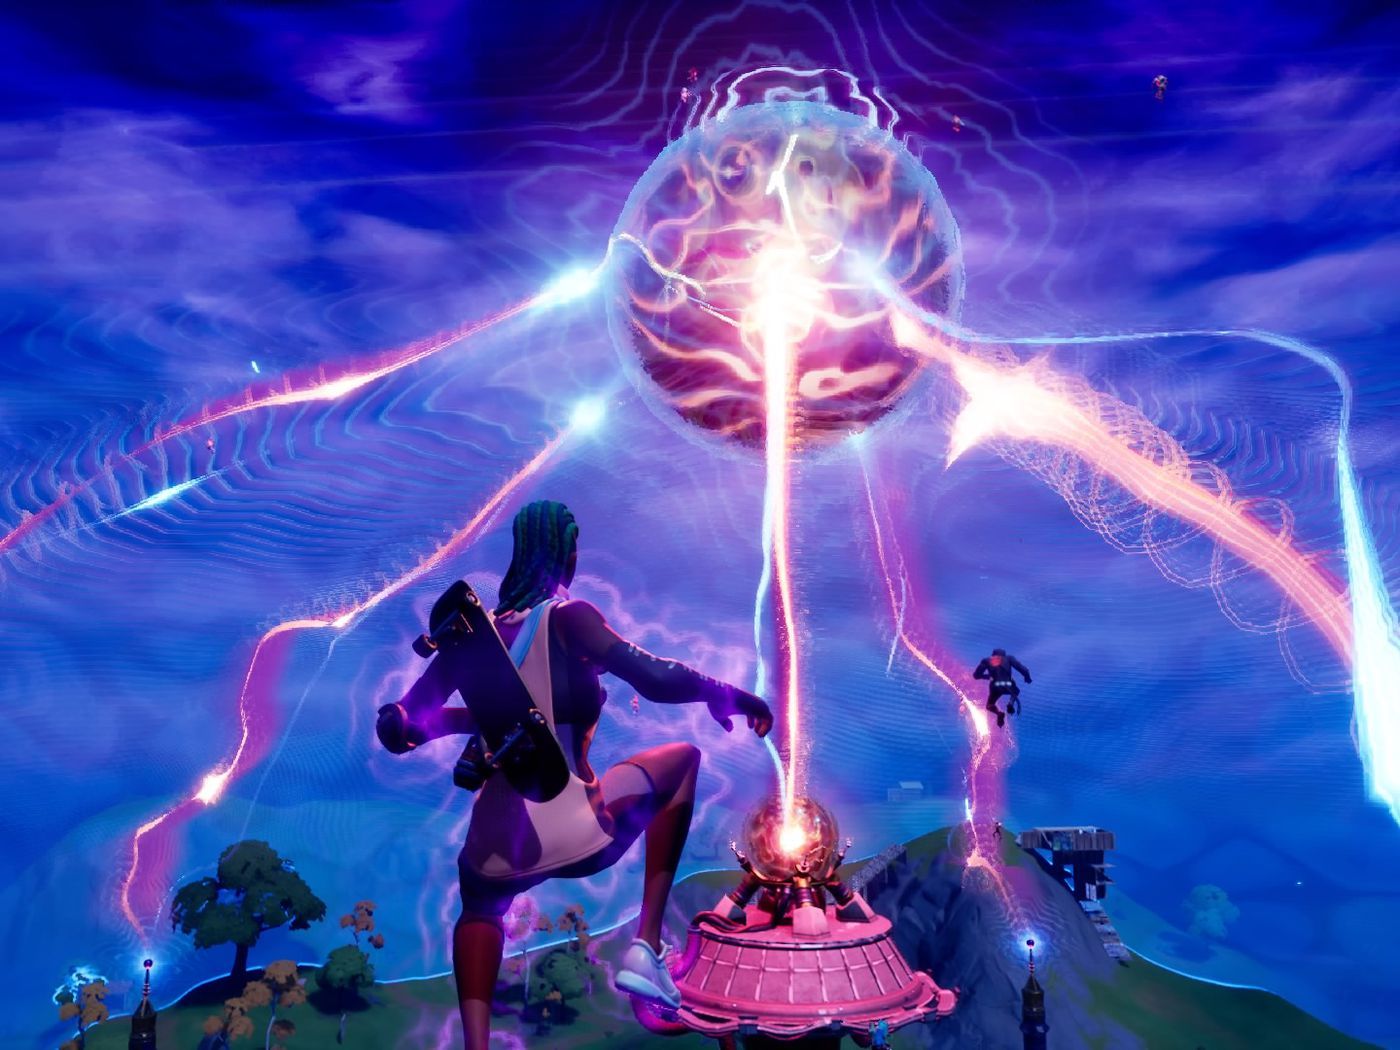 Fortnite's 'device' event blew up The Agency and turned the storm